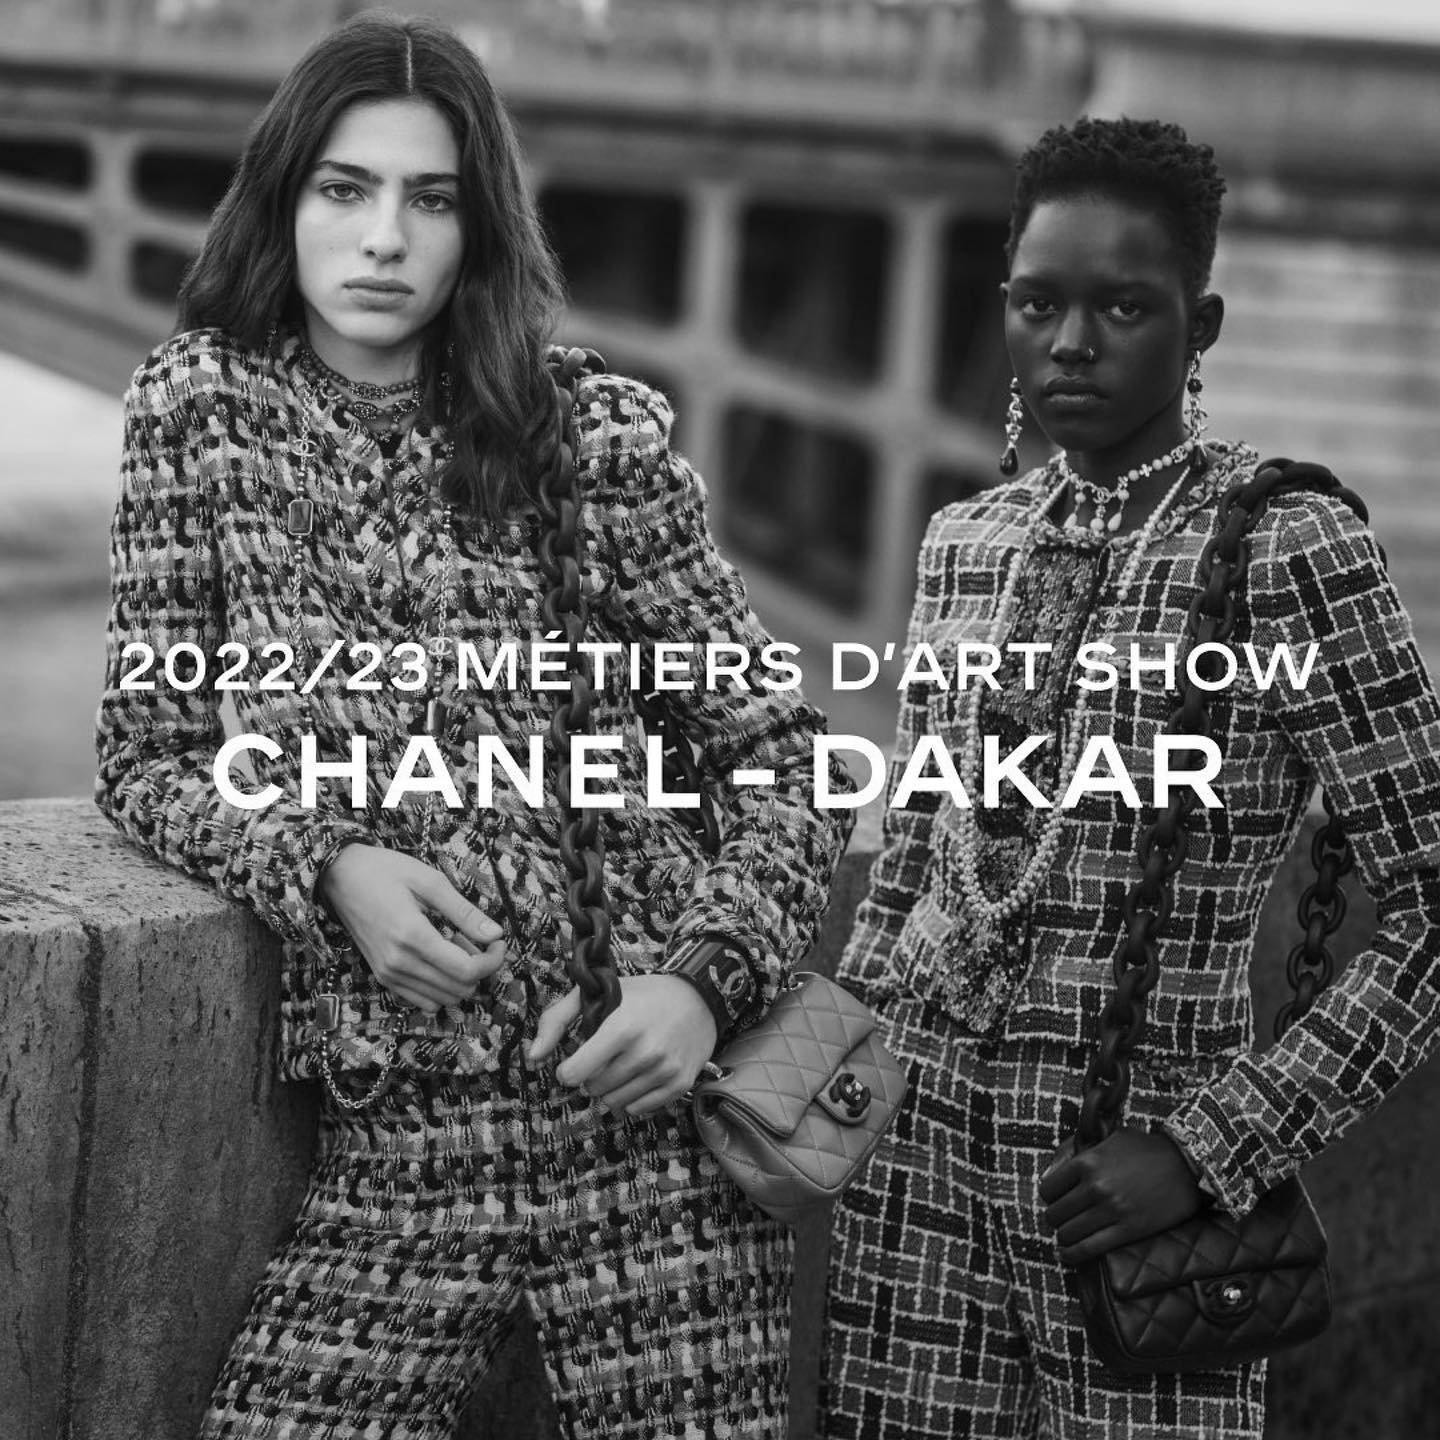 Malick Bodian for Chanel in Dakar with Akon, Jill, Kathia, Mariam and Maty  — Anne of Carversville